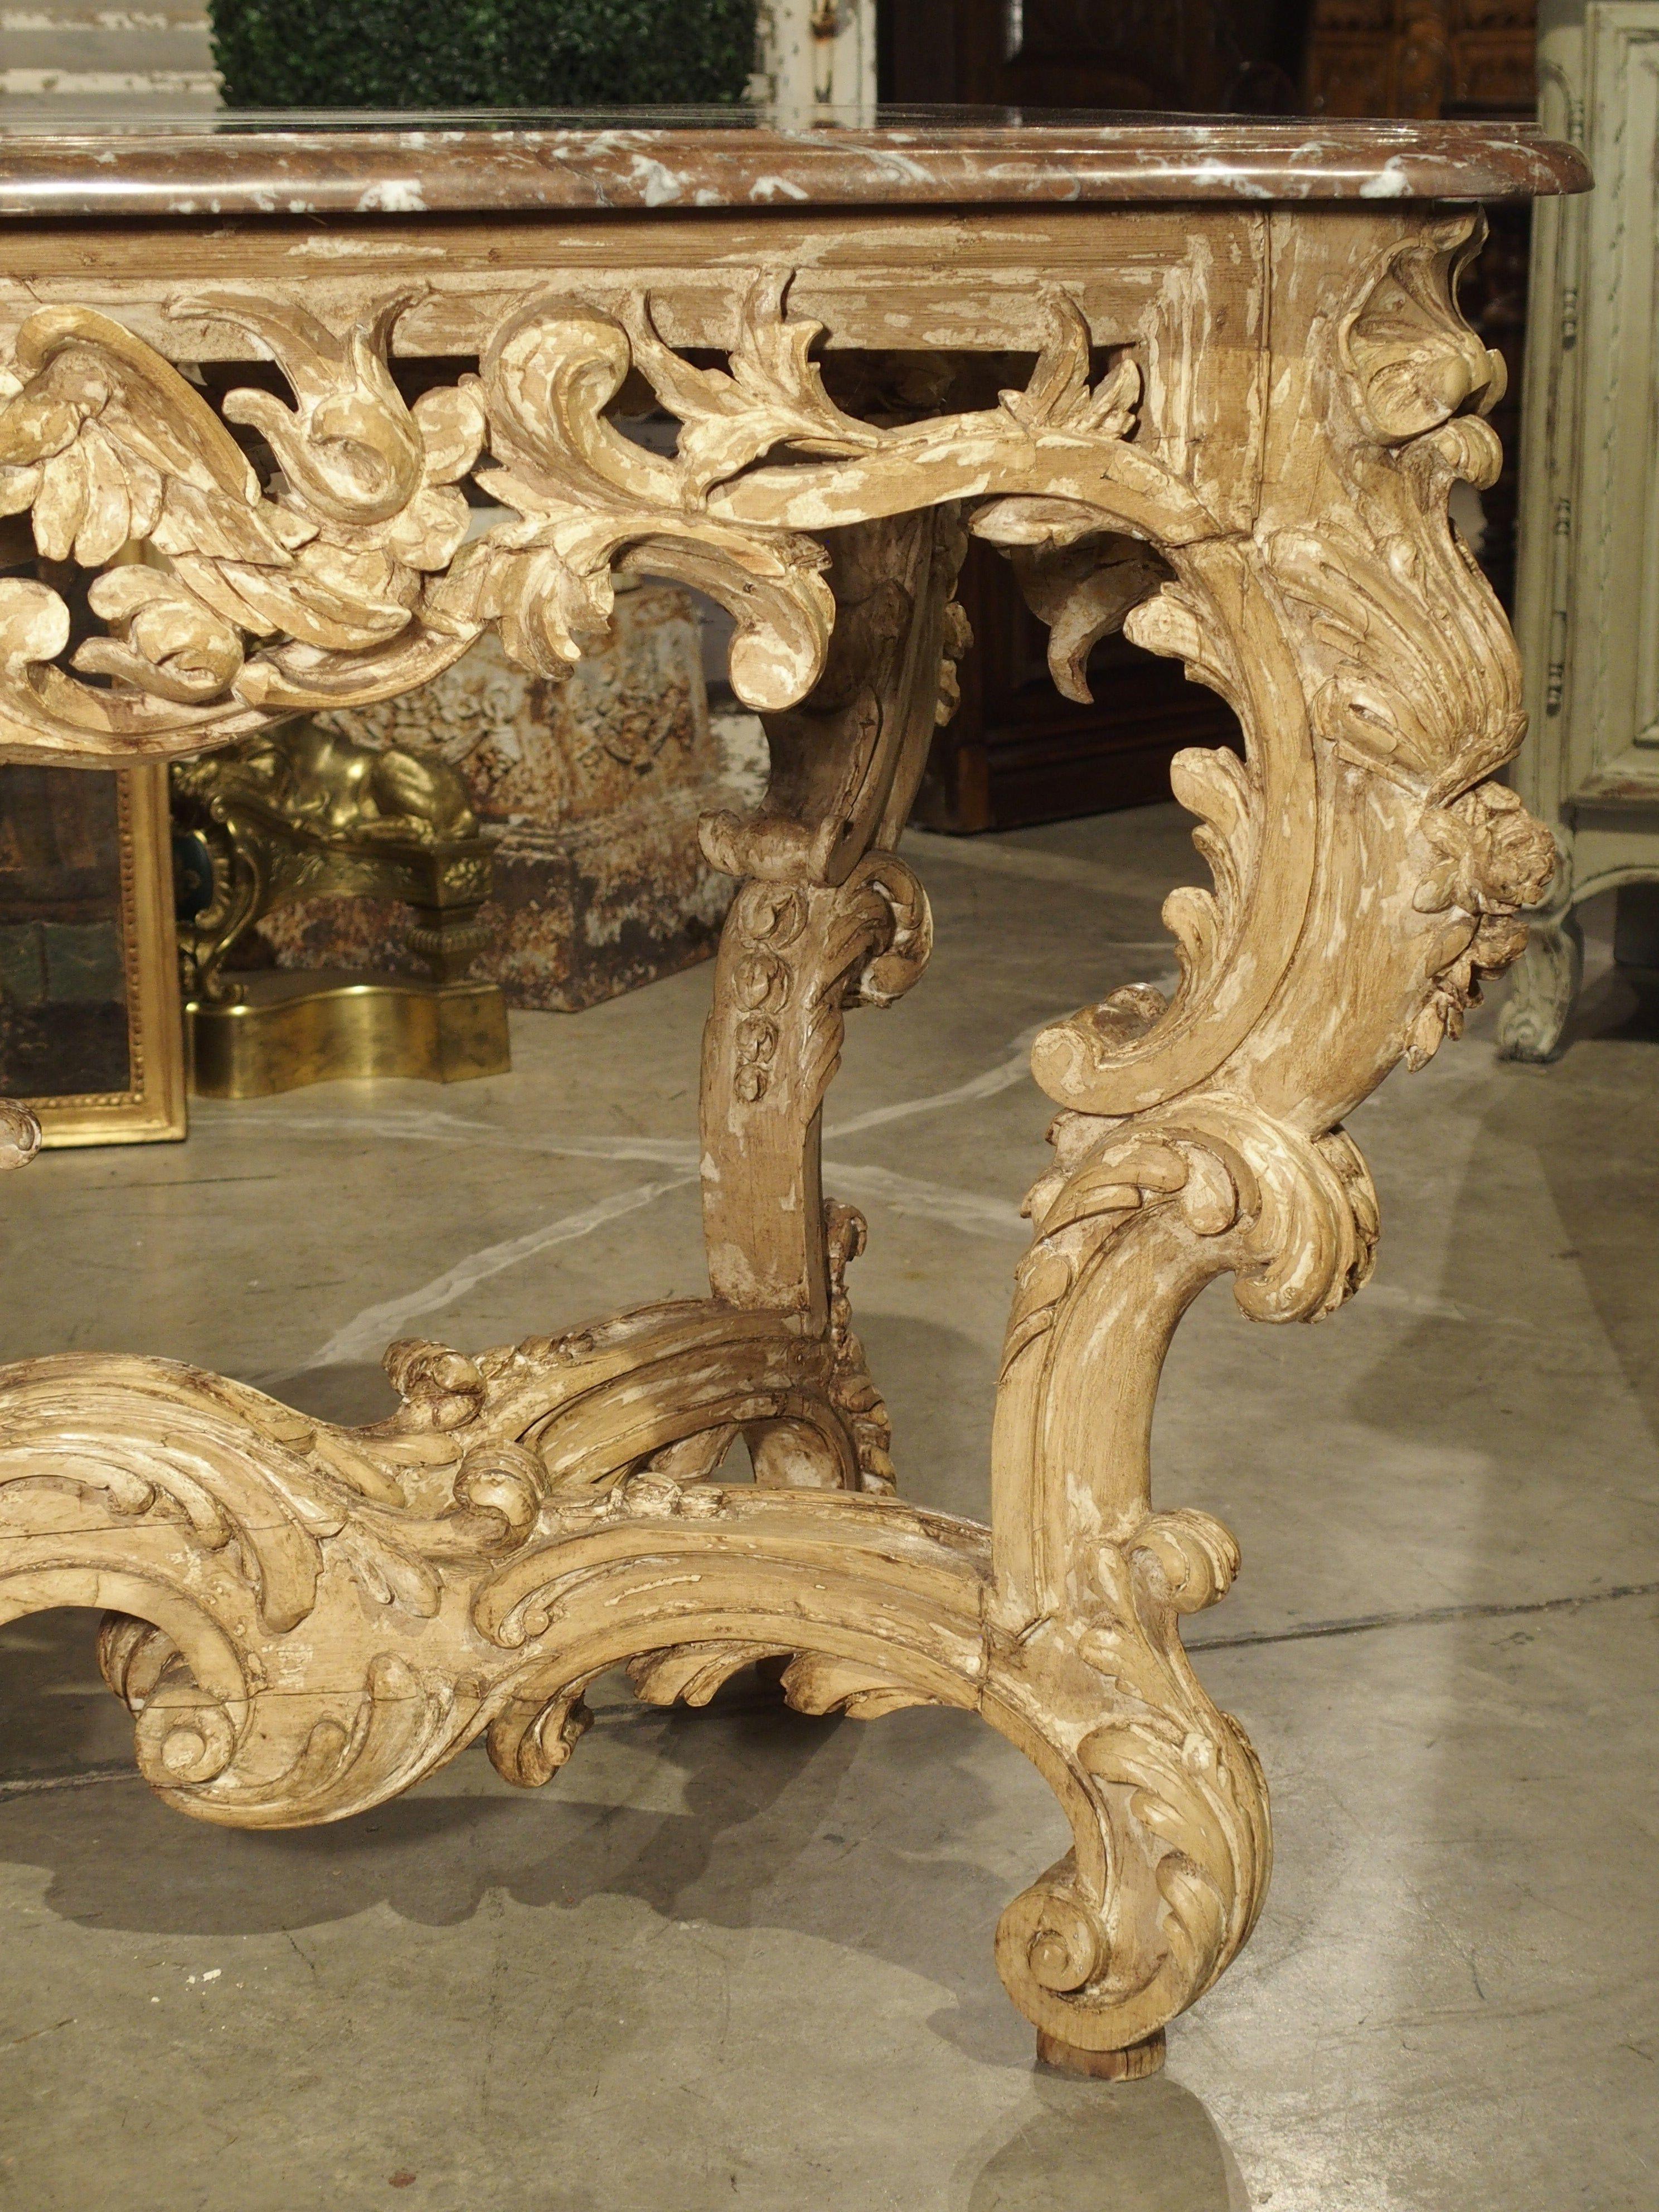 This elegant and beautifully carved wooden center table from France incorporates design elements from two of the most popular French periods.

The intricate hand-carved base exhibits aspects of the Rococo style: highly ornamental with asymmetrical